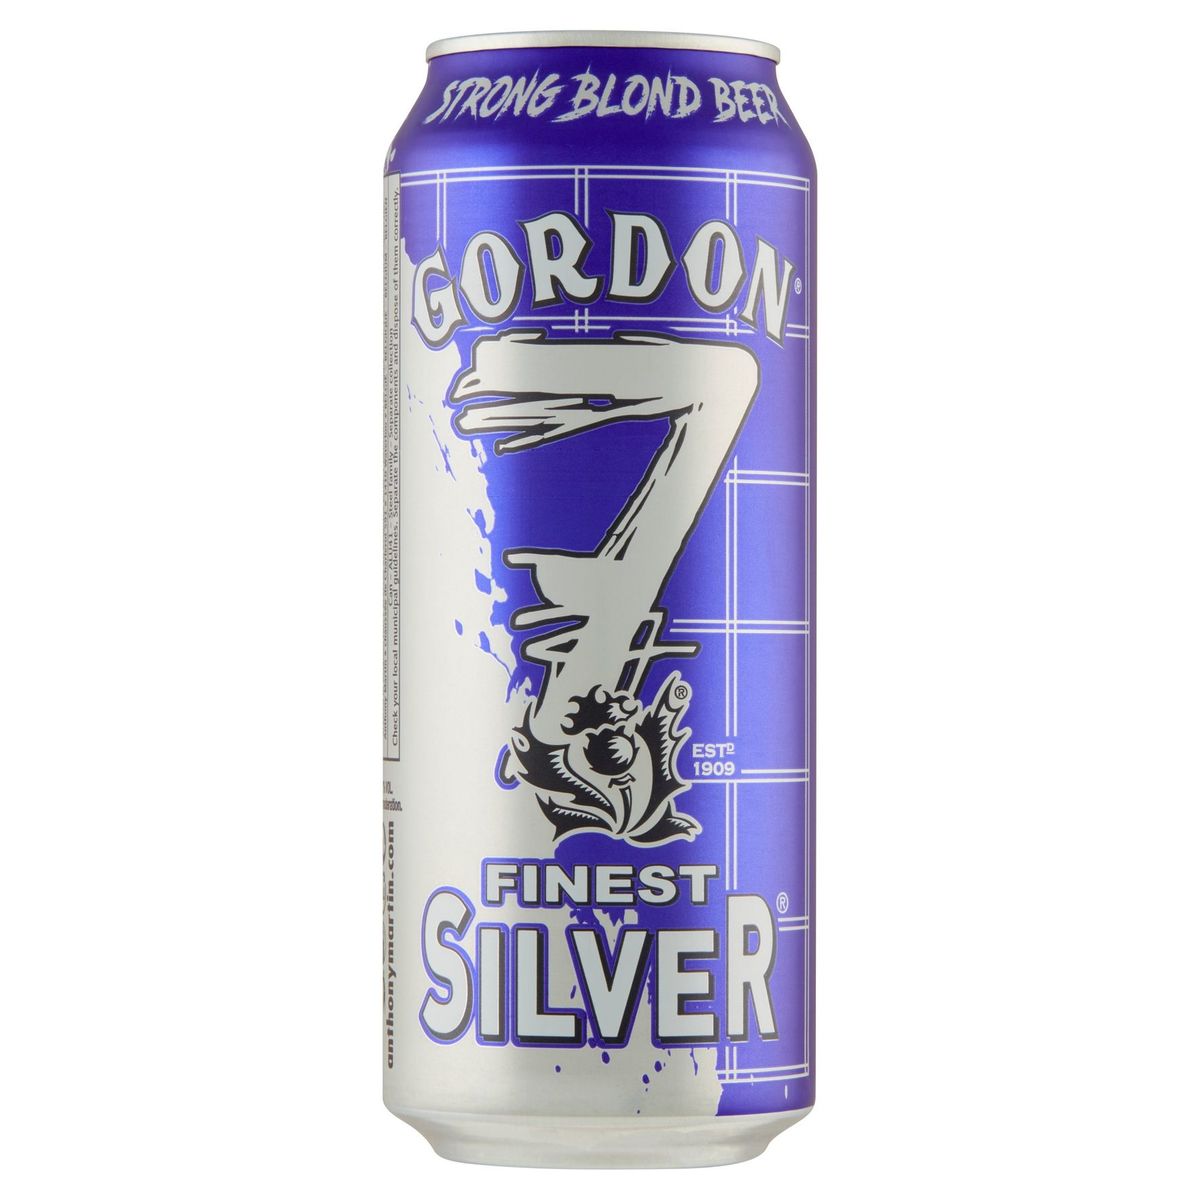 Gordon 7 Finest Silver Strong Blond Beer Canette 50 cl